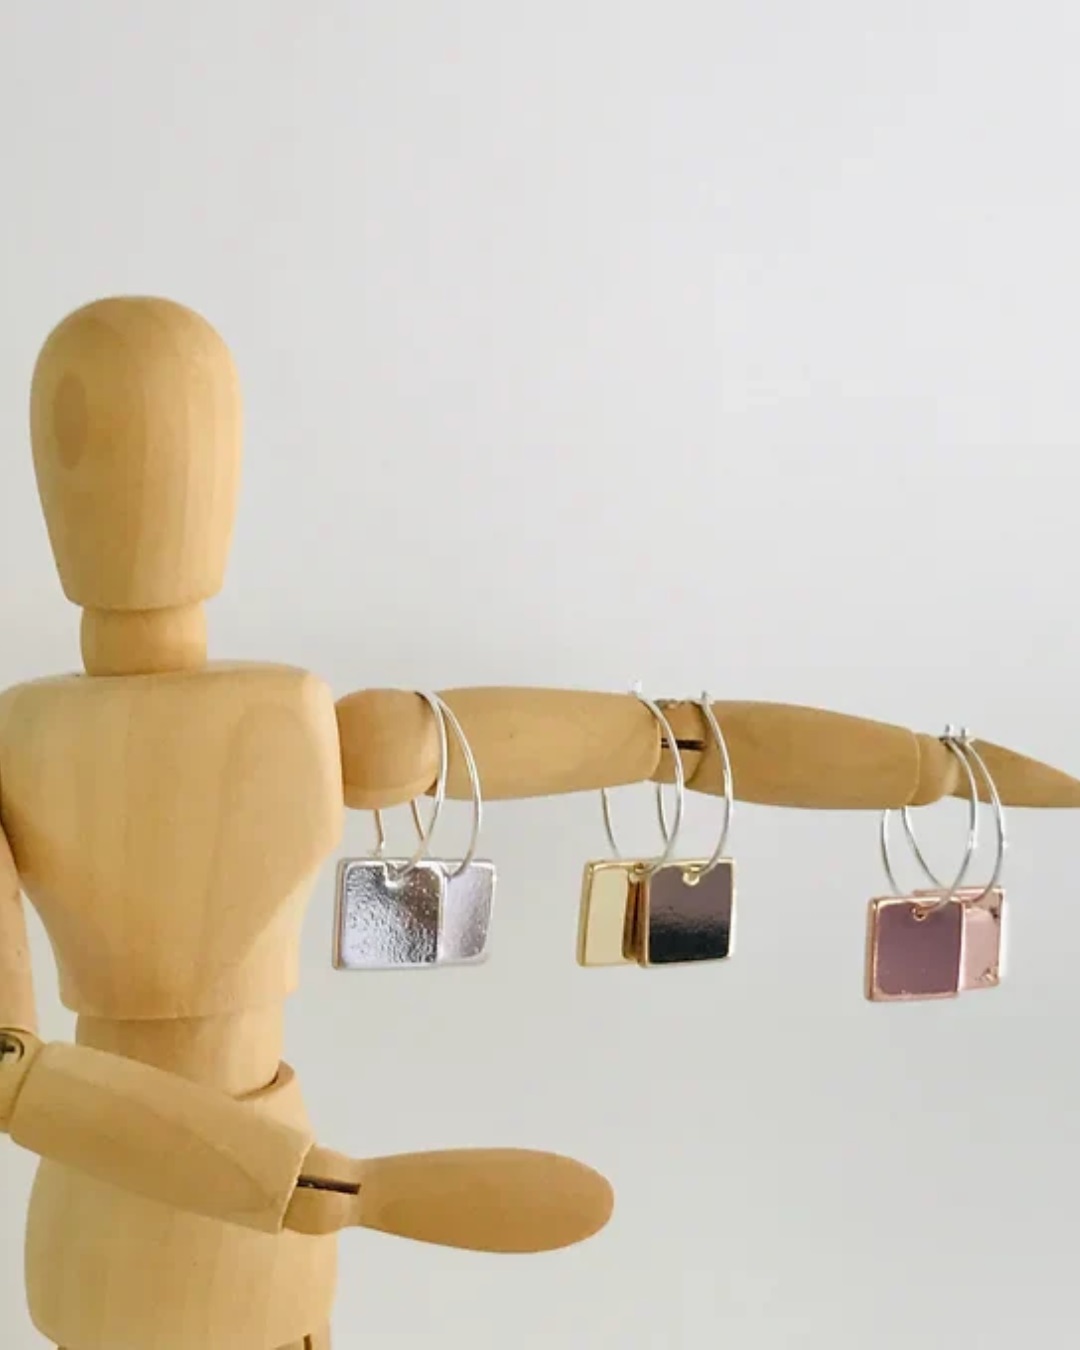 Rose gold, gold and silver square earrings hanging on wooden man arm